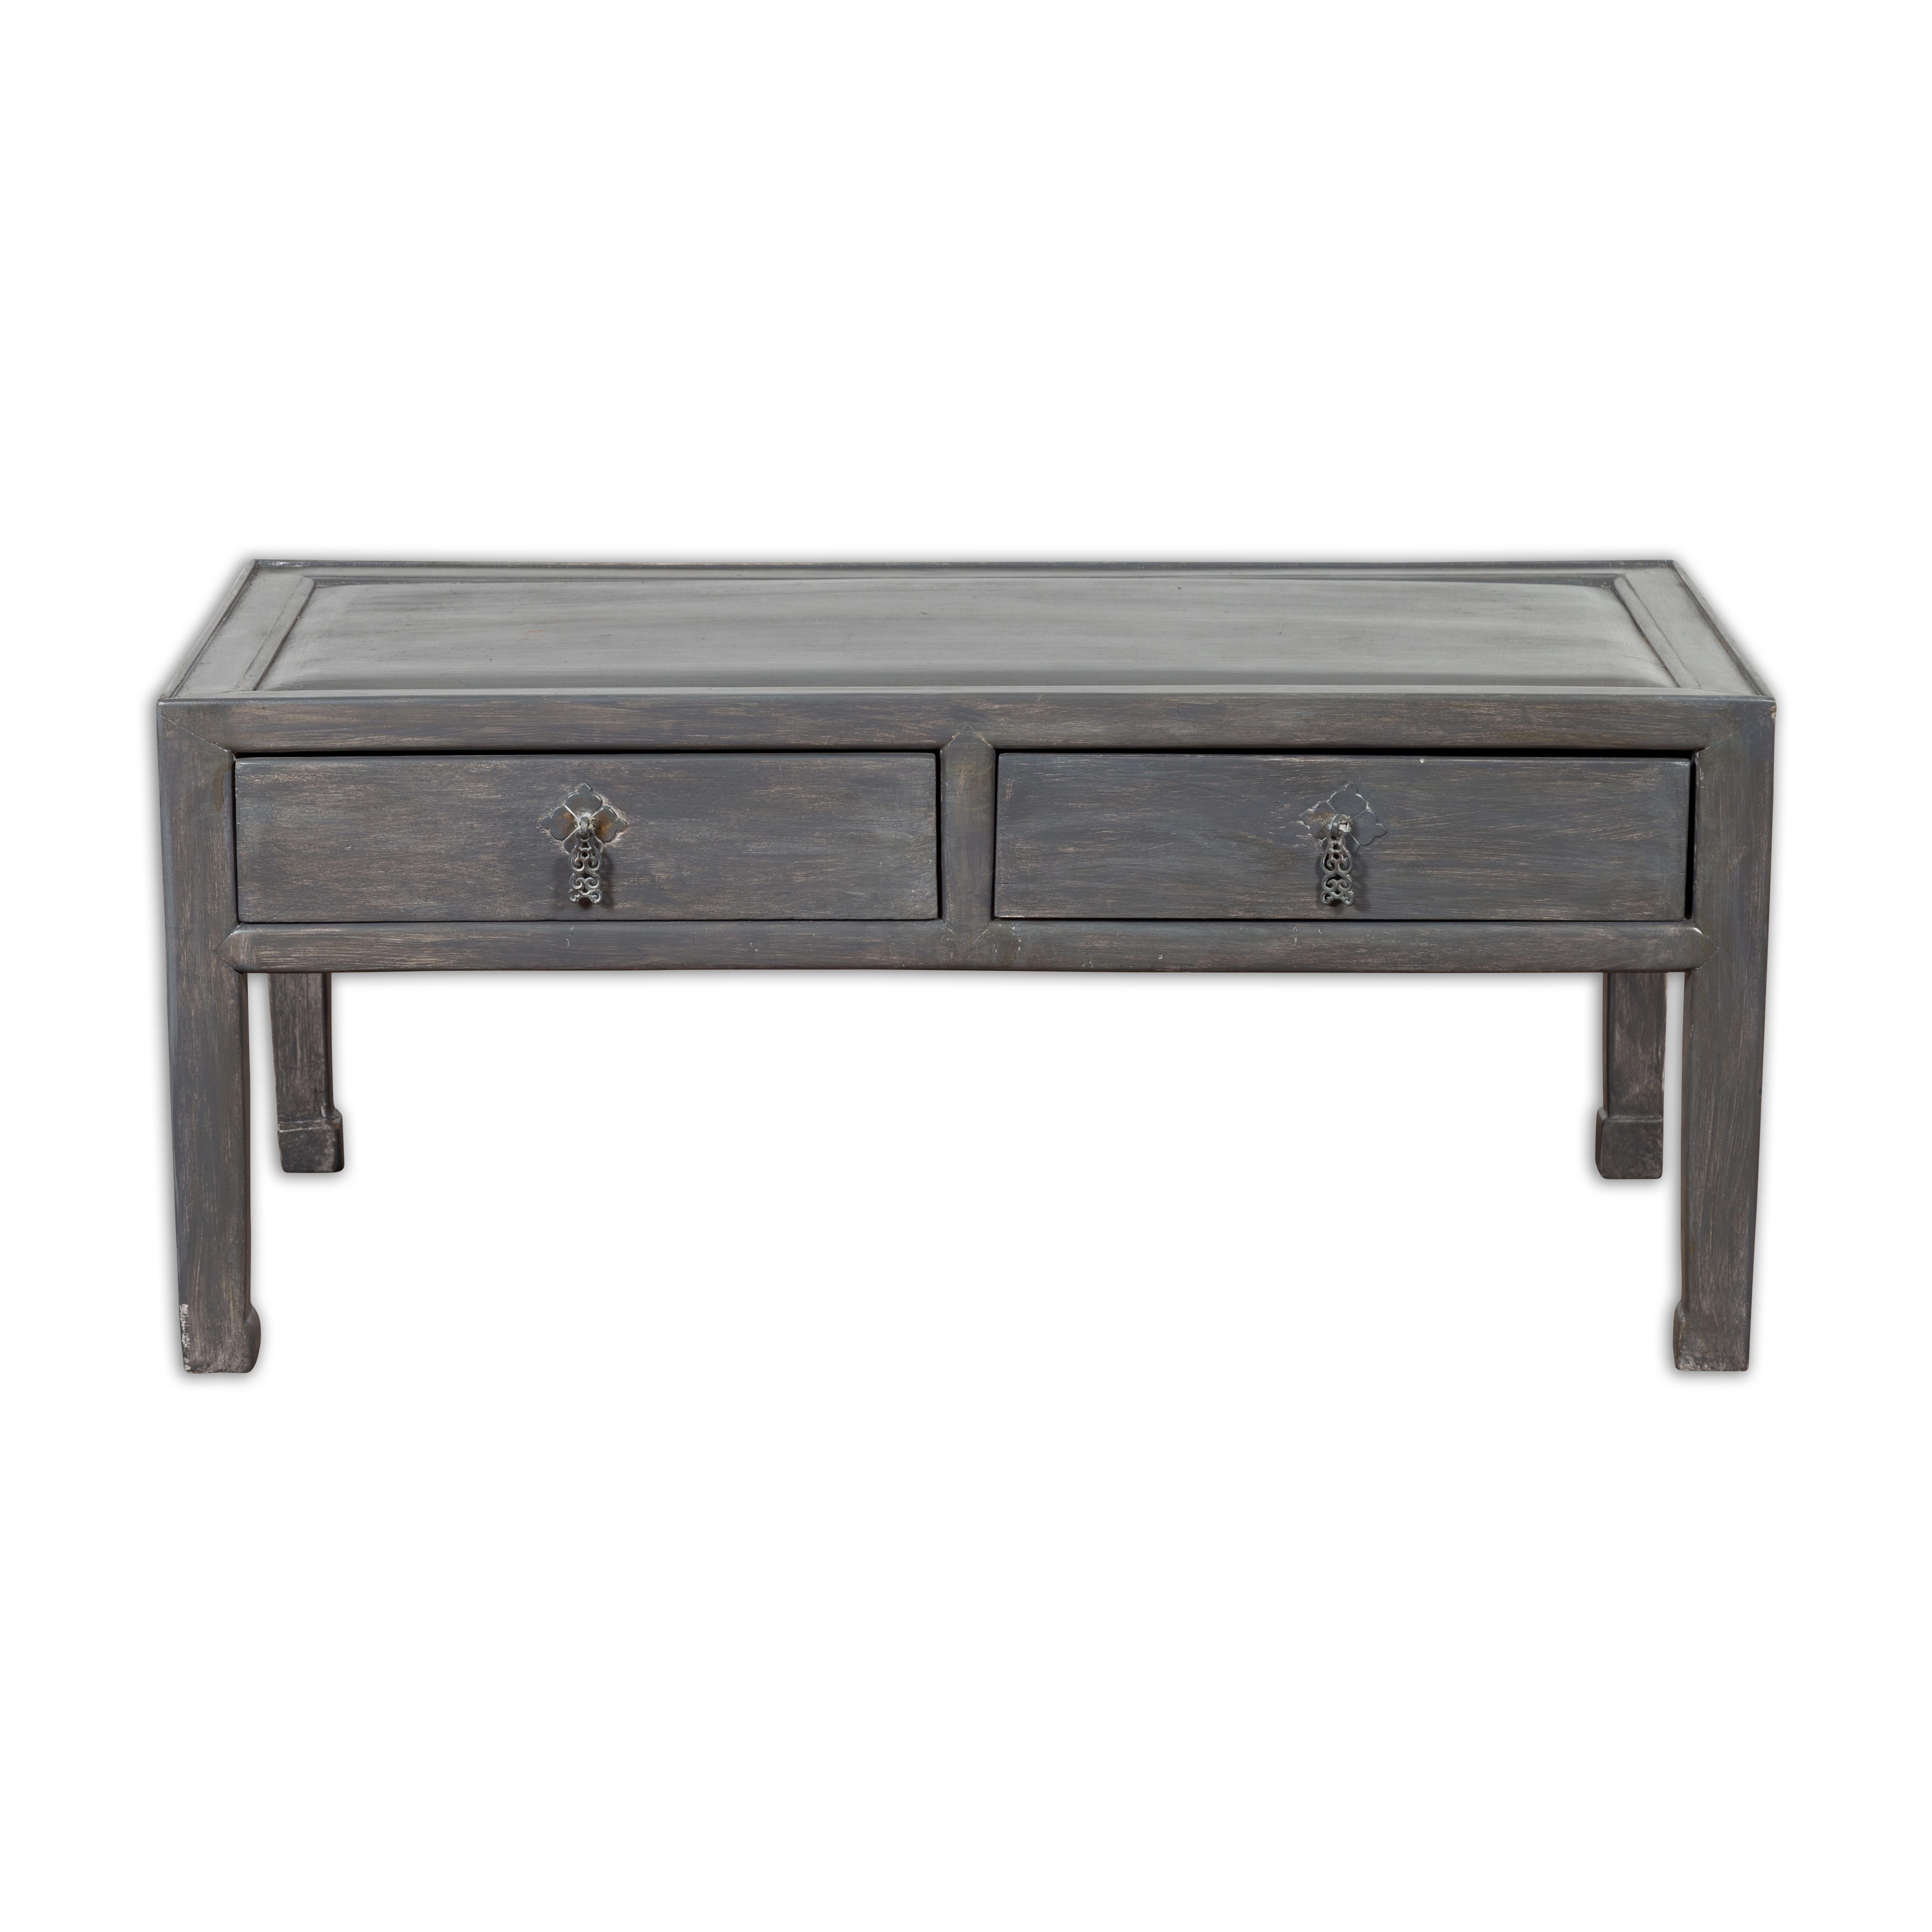 Chinese Late Qing Low Table with Two Drawers and Custom Grey Silver Lacquer For Sale 11